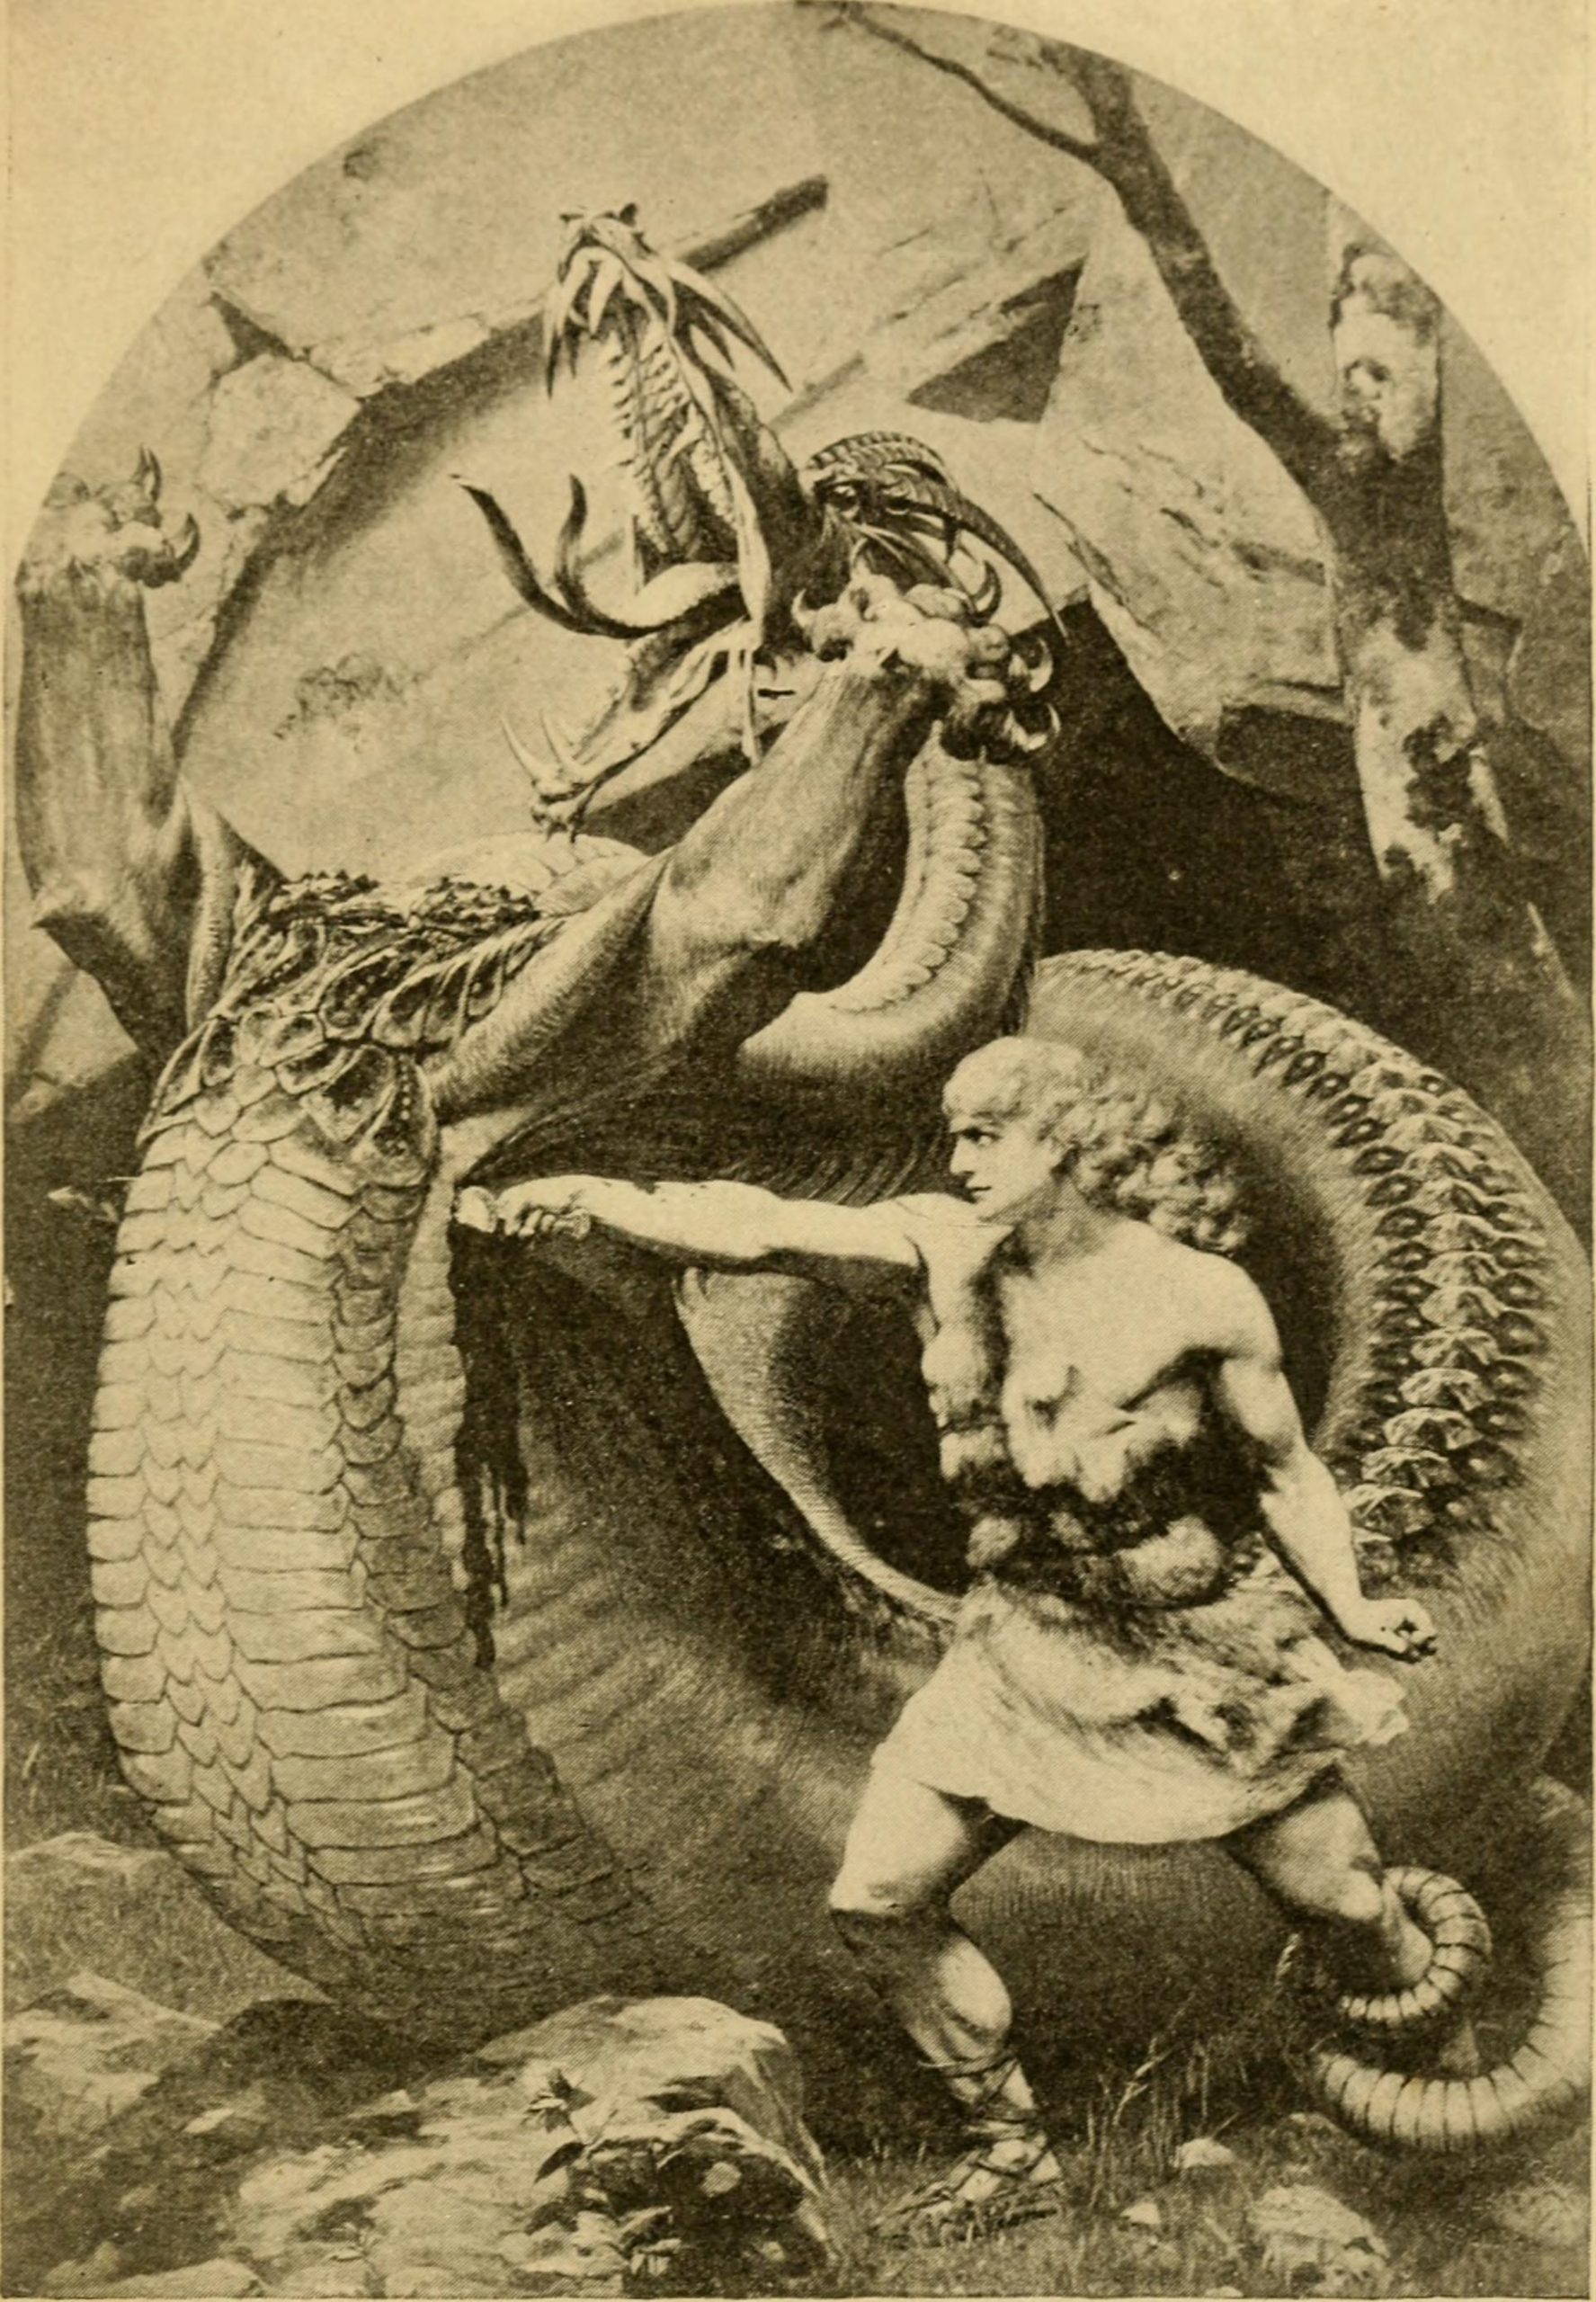 A man points at a large serpent.